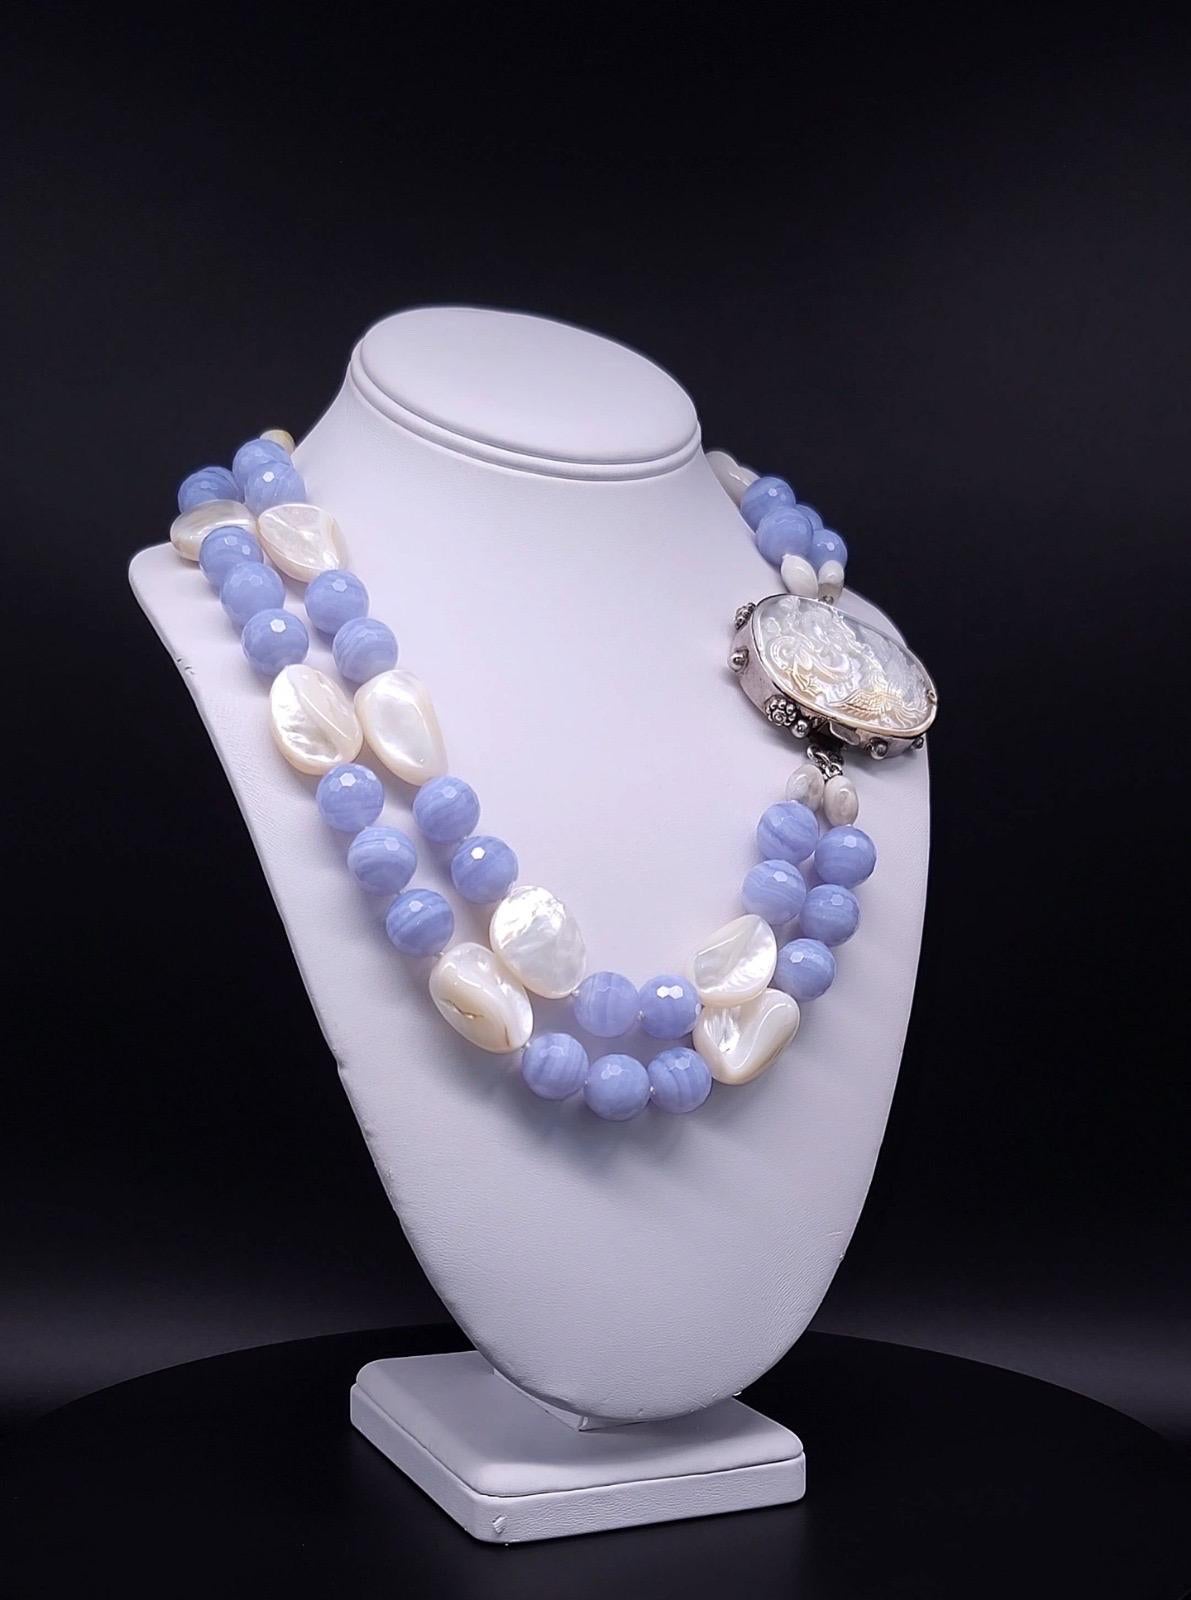 One-of-a-Kind

This stunning piece of jewelry boasts a celestial combination of faceted sky blue lace 16m.m beads and polished mother-of-pearl beads that resemble fluffy clouds. The sterling silver clasp features a beautifully carved mother-of-pearl